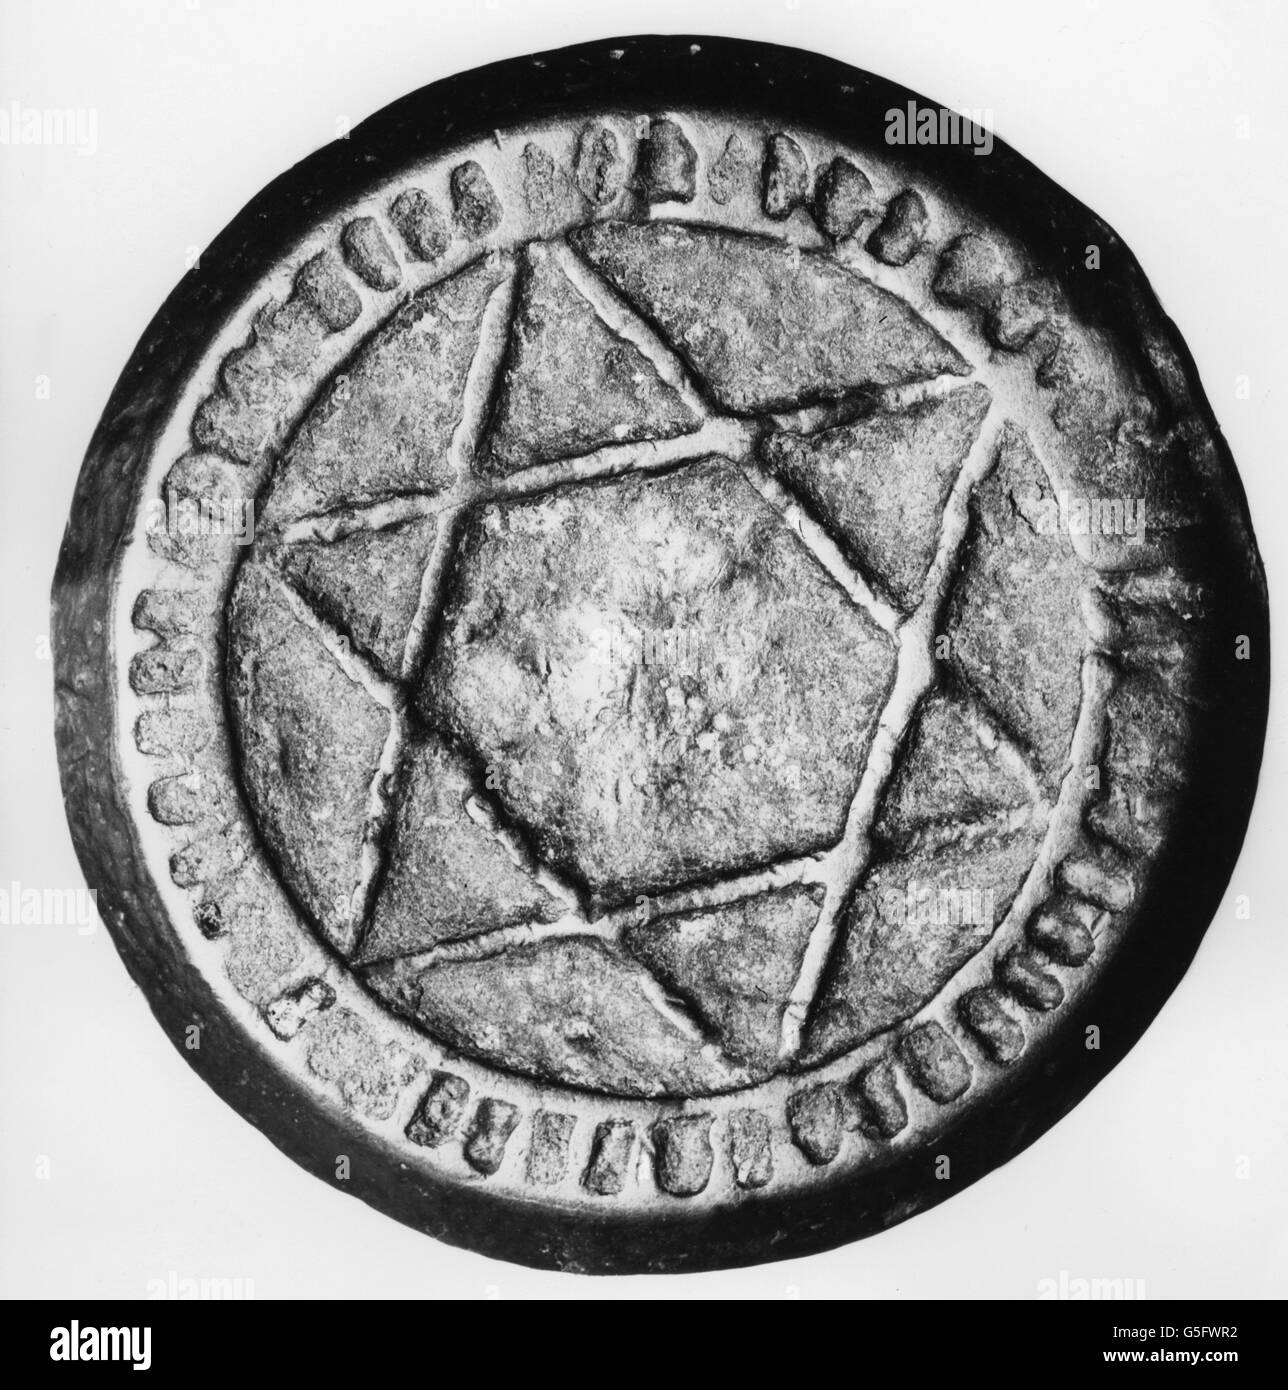 money / finances, coins, coin with Star of David, Judaism, the Jews, Jewry, Jewishness, Jewish, symbol, symbols, Star of David, star, stars, David, coin, coins, numismatics, historic, historical, Additional-Rights-Clearences-Not Available Stock Photo